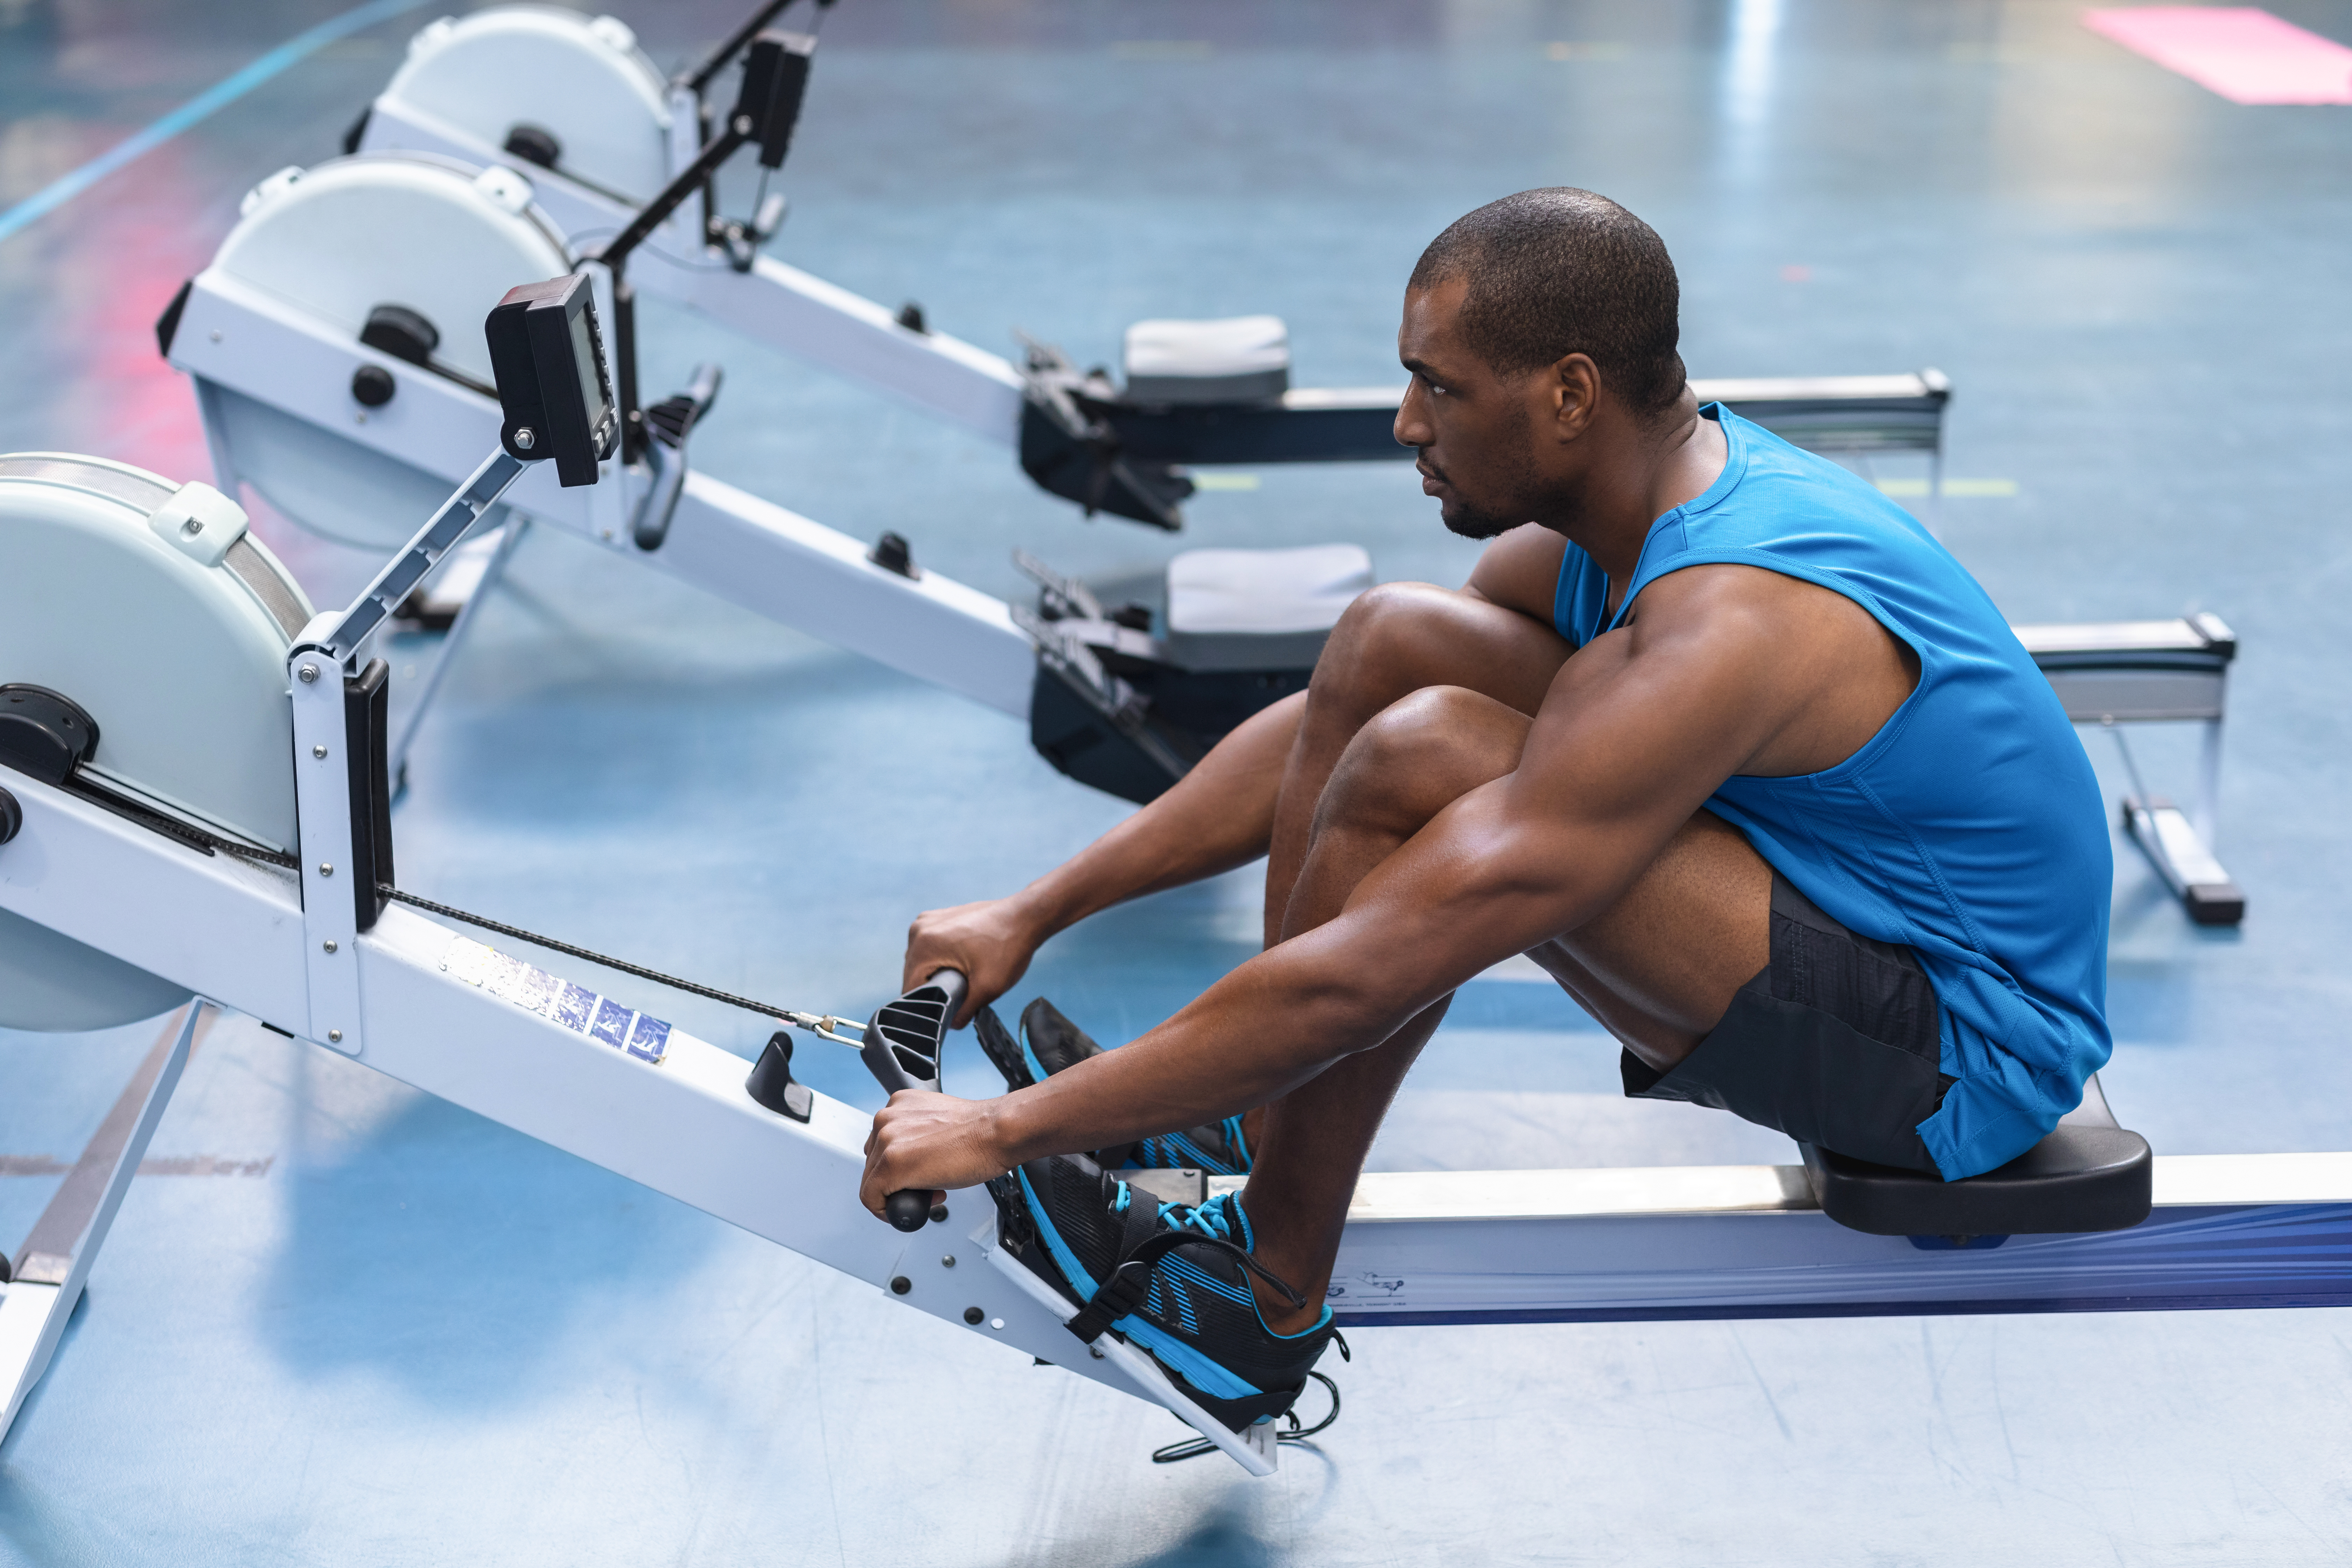 The benefits of rowing machines